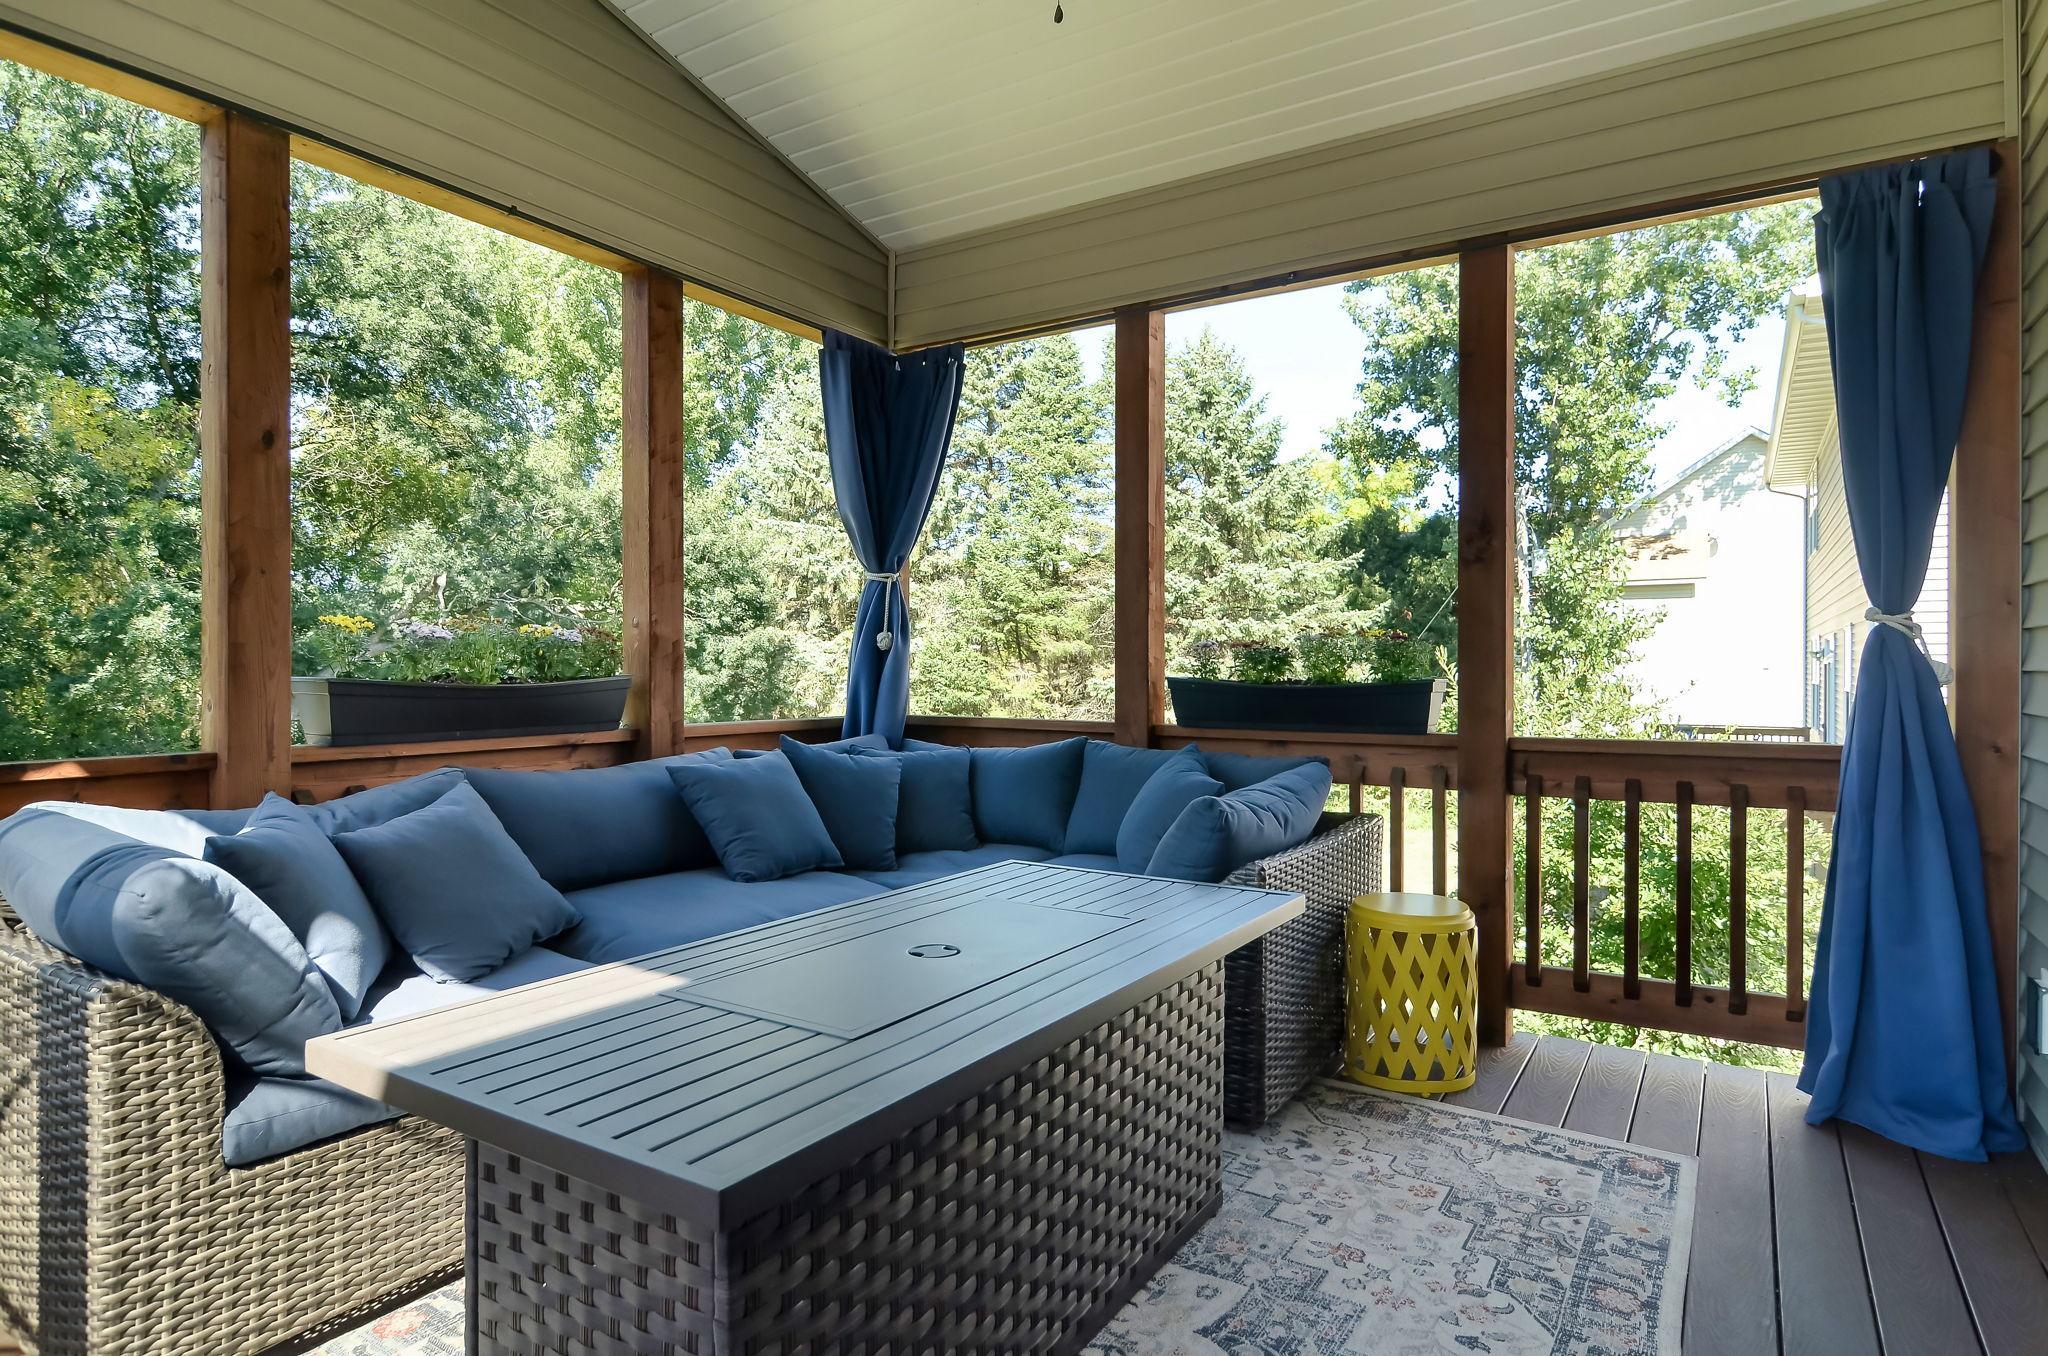 Cozy in heat or rain, the covered deck is the outdoor living room of your dreams